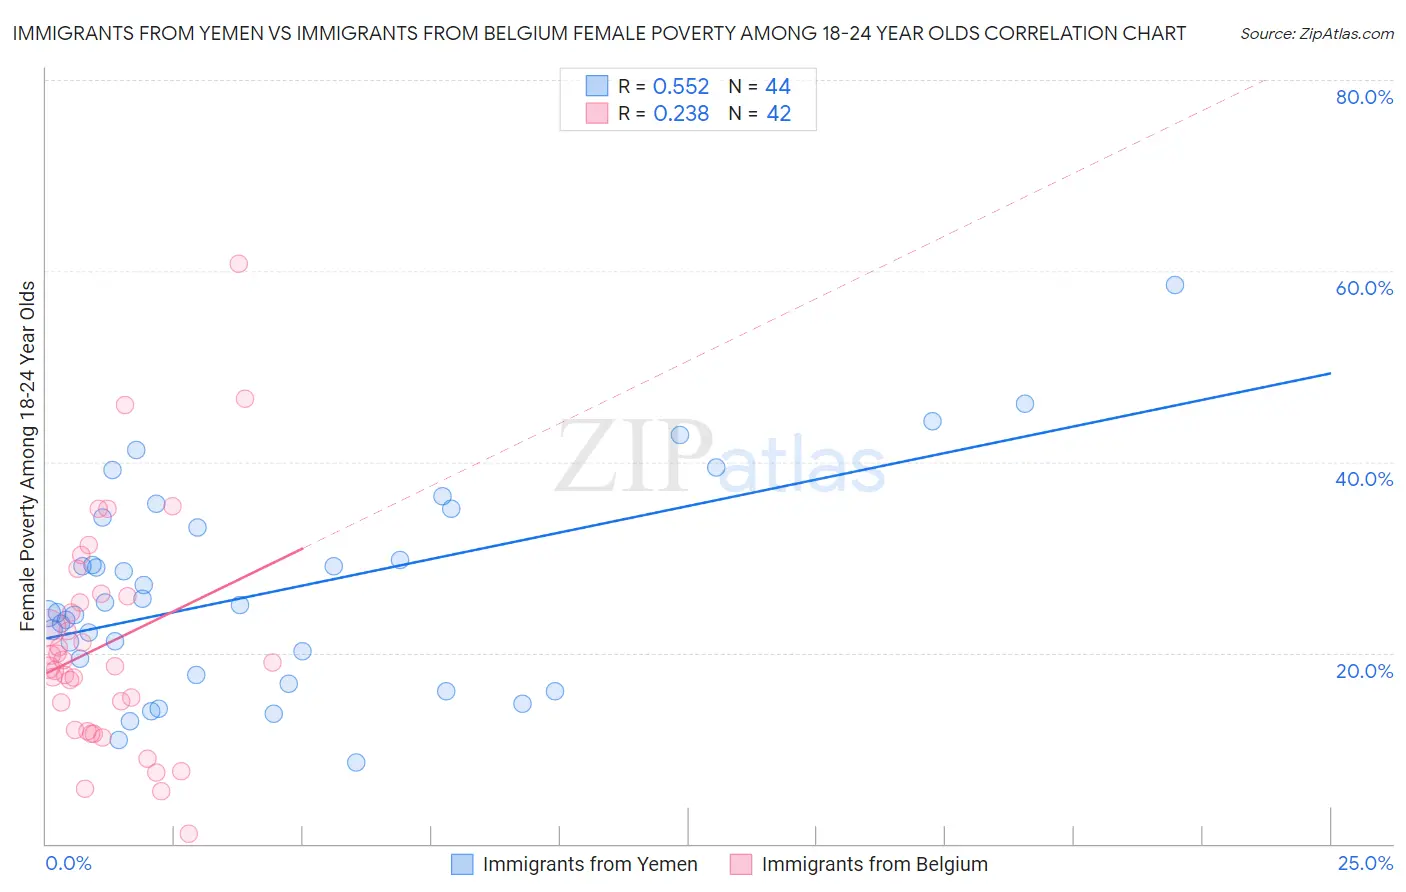 Immigrants from Yemen vs Immigrants from Belgium Female Poverty Among 18-24 Year Olds